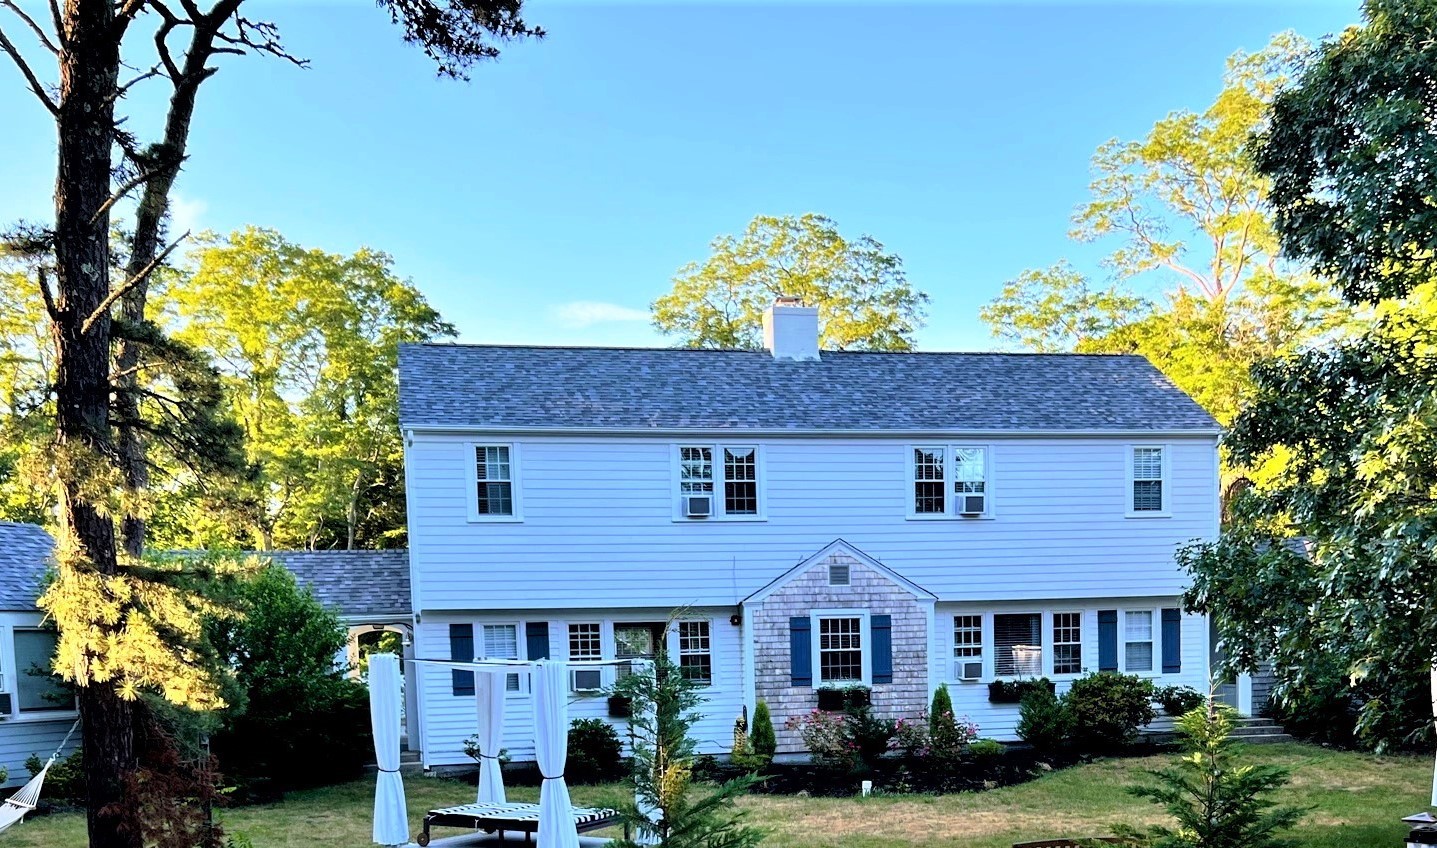  bed and breakfast inn for sale - The Seagrove (Cape Cod)